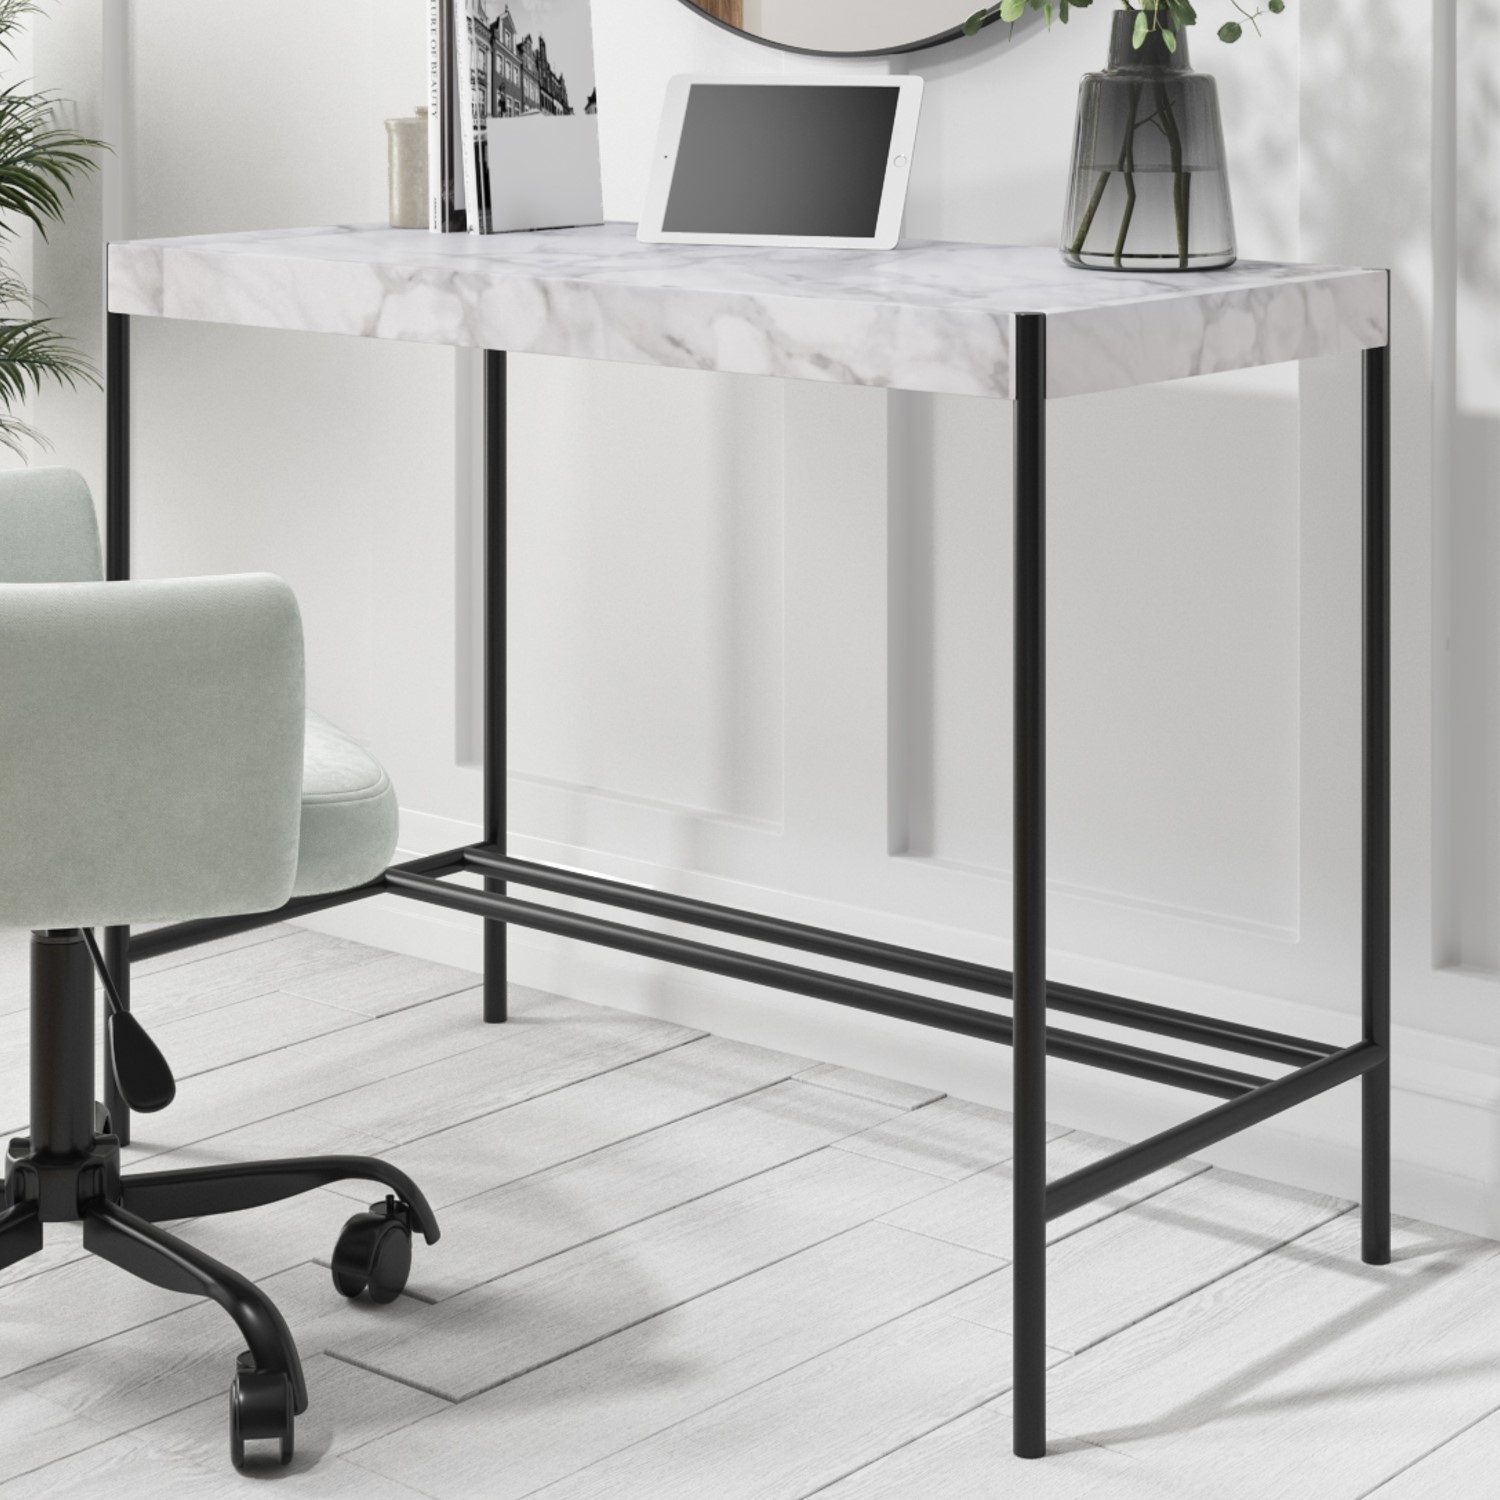 Read more about White marble & cream boucle office desk and chair set nico